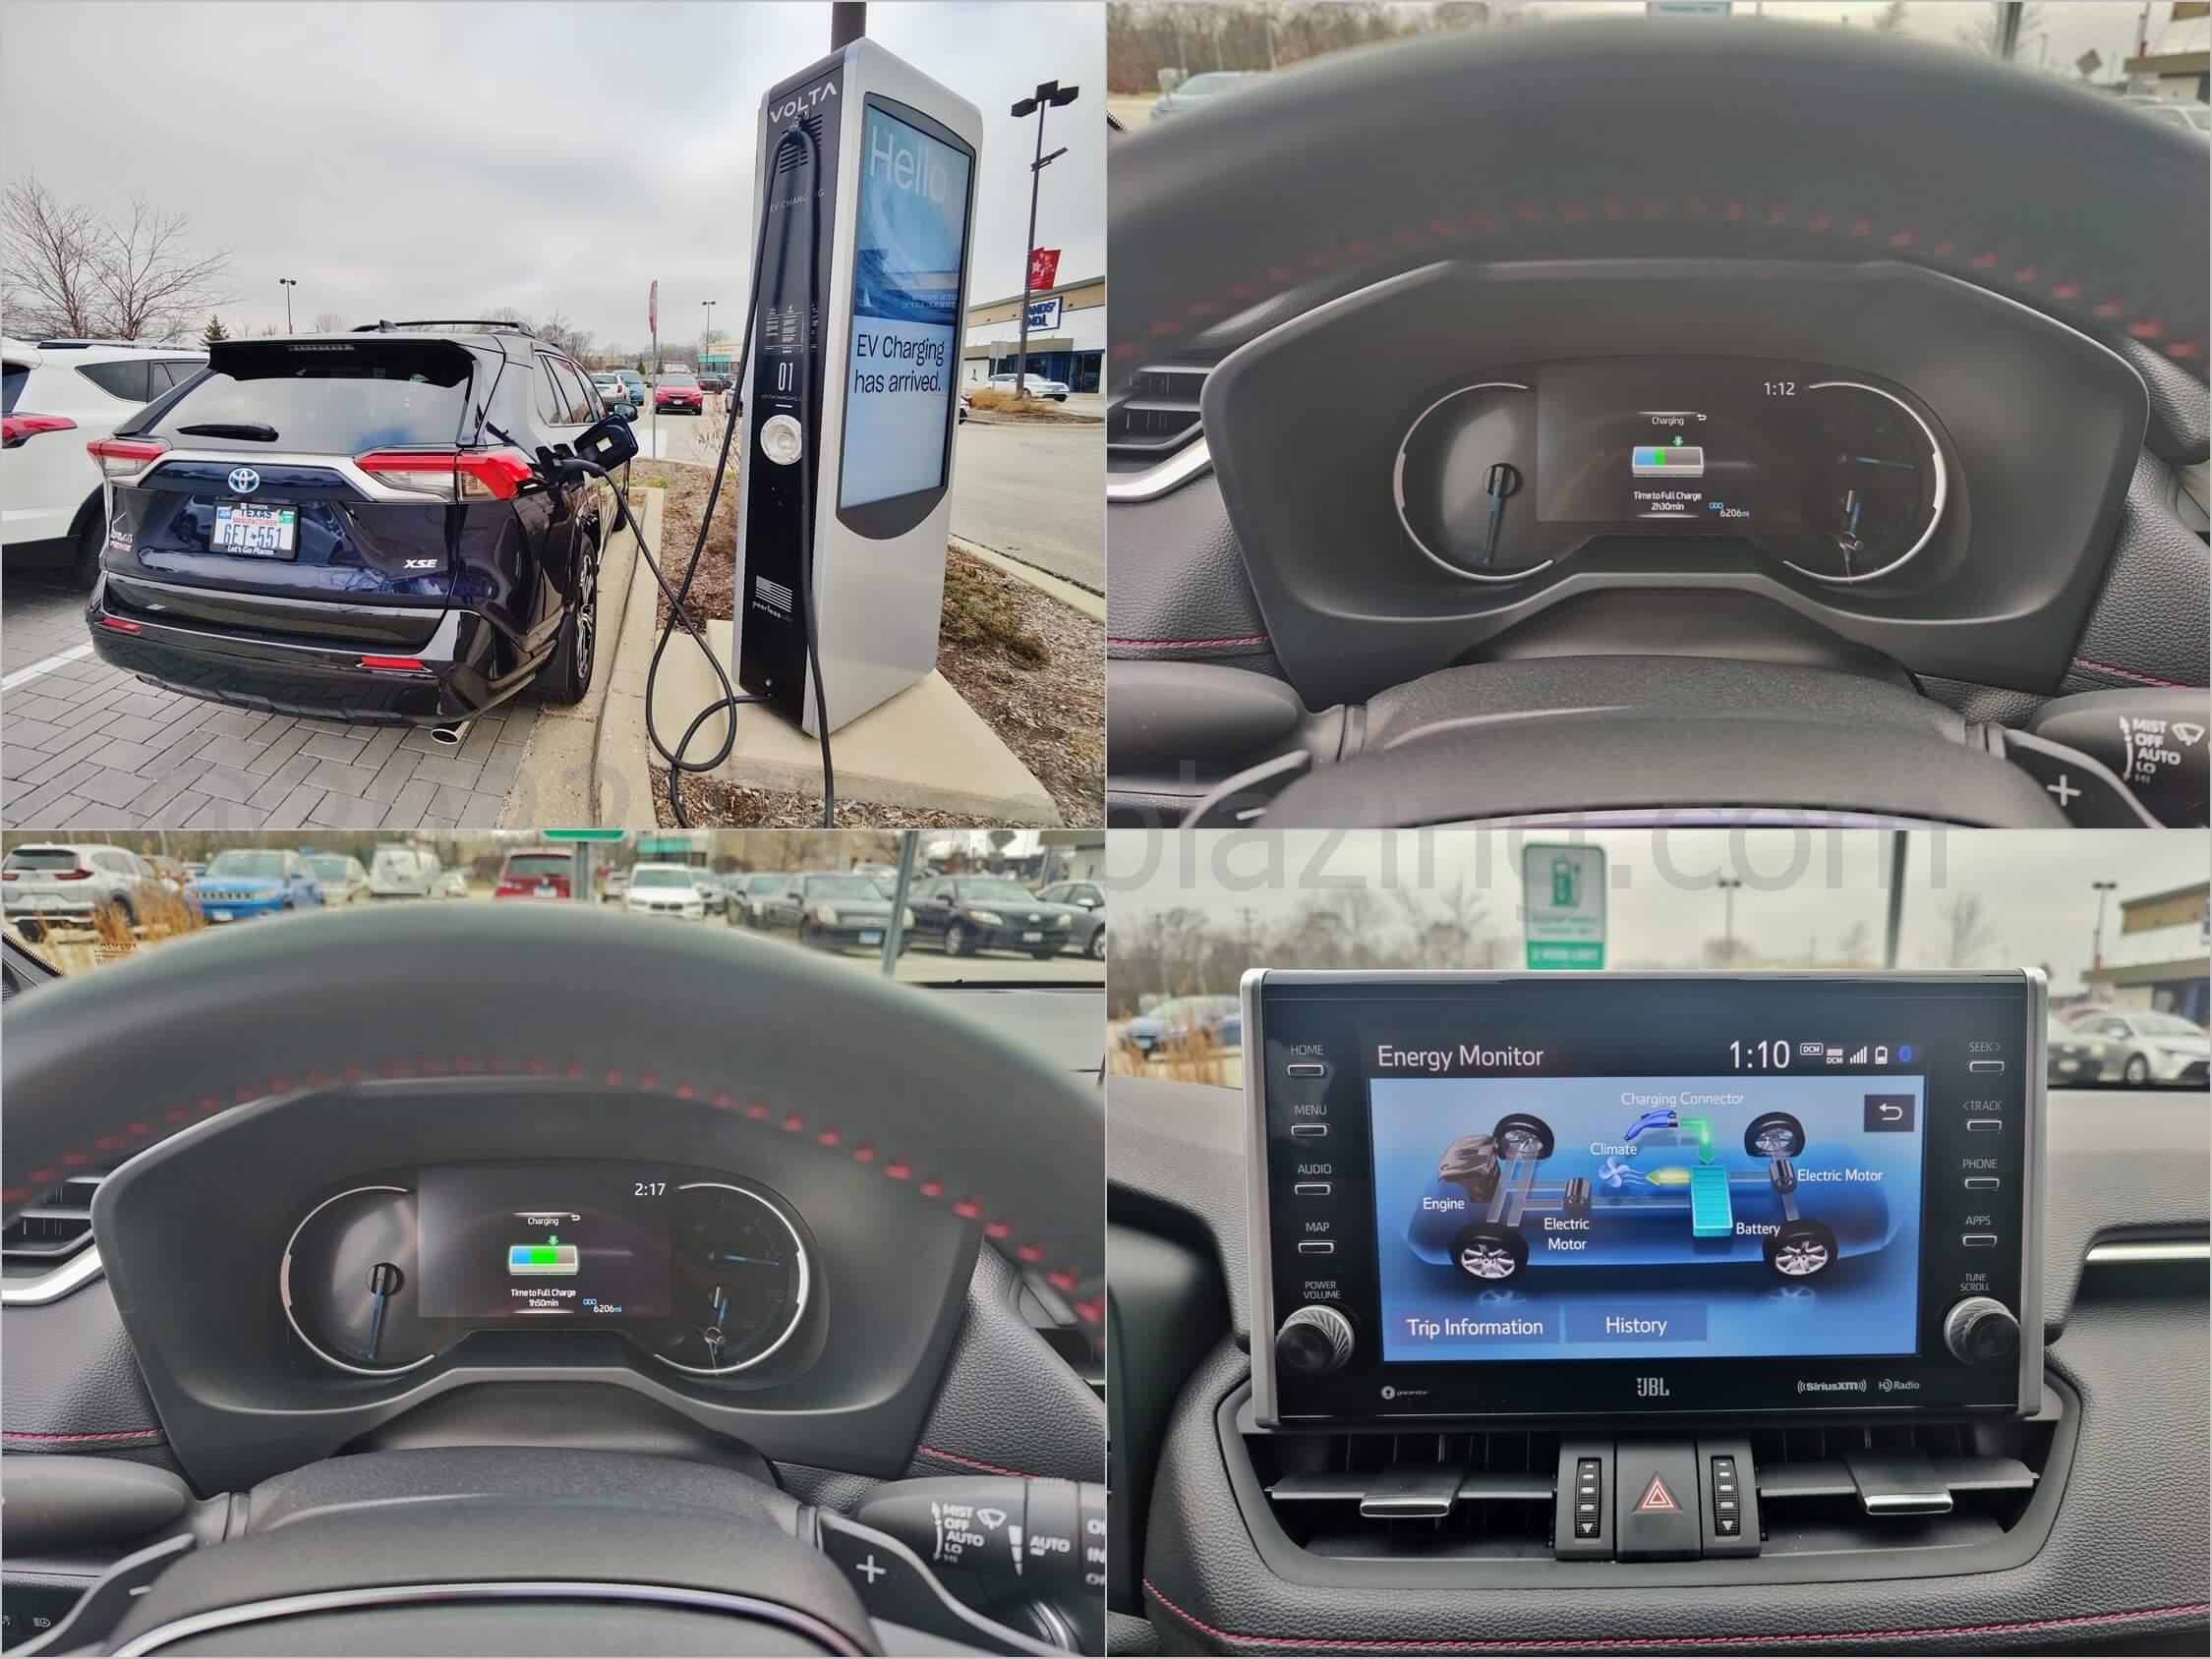 2022 Toyota RAV4 Prime XLE AWD PHEV: at 6 KW Volta public charger onboard 6.6 kW charger should provide 80% charge to 18.1 kW Li-Ion within 2.5 hours good for 40 EV miles